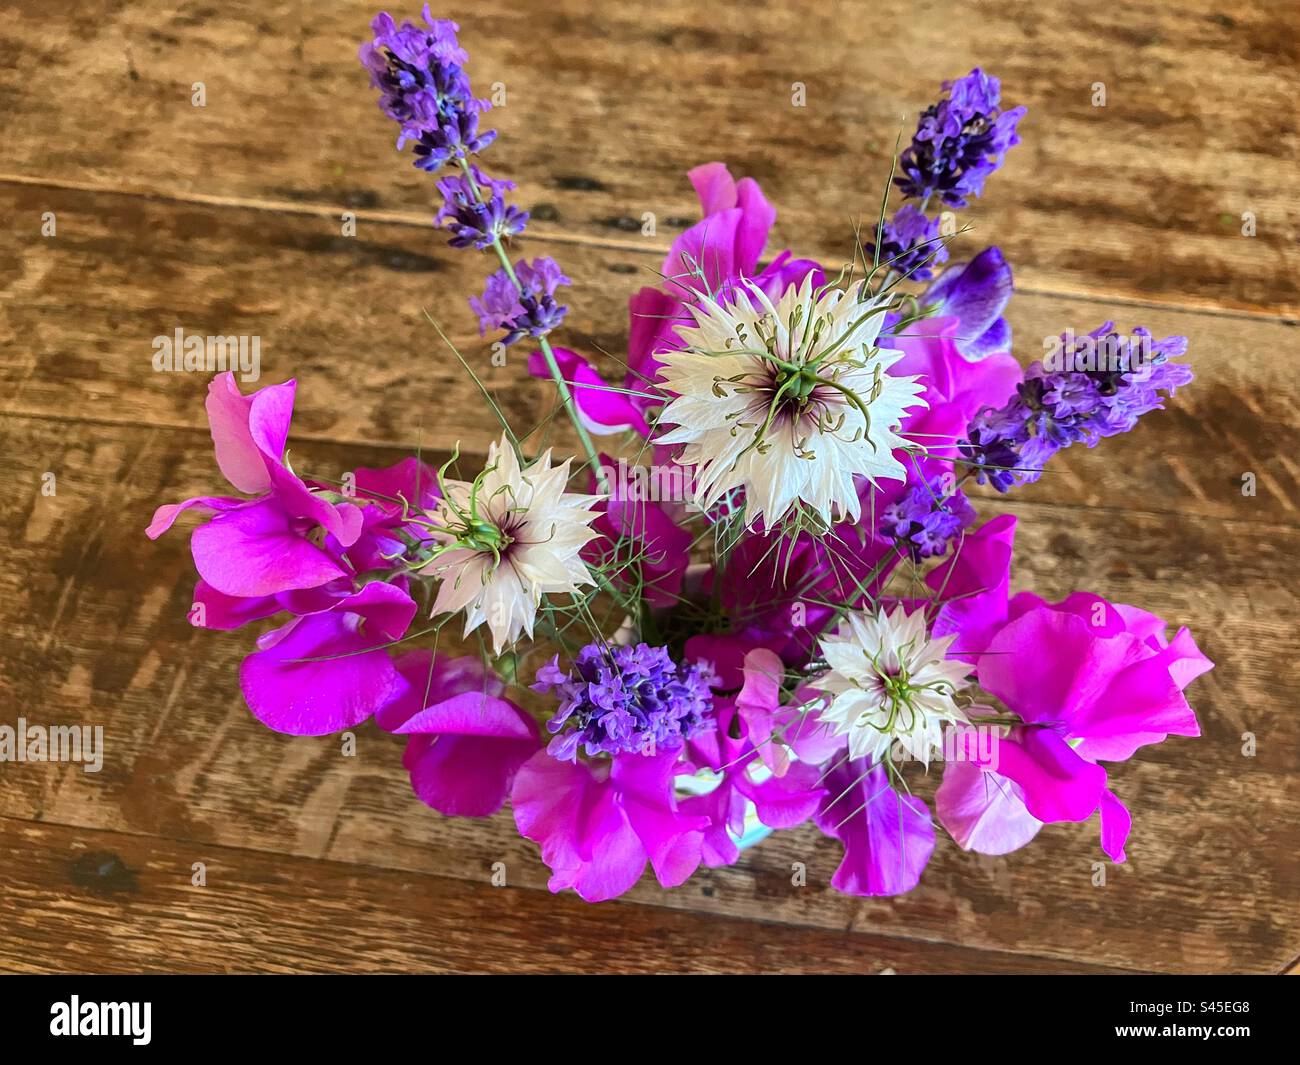 Small bouquet of pink sweet peas, purple lavender and white love in a mist flowers in a vase on a wooden table top, seen from above Stock Photo